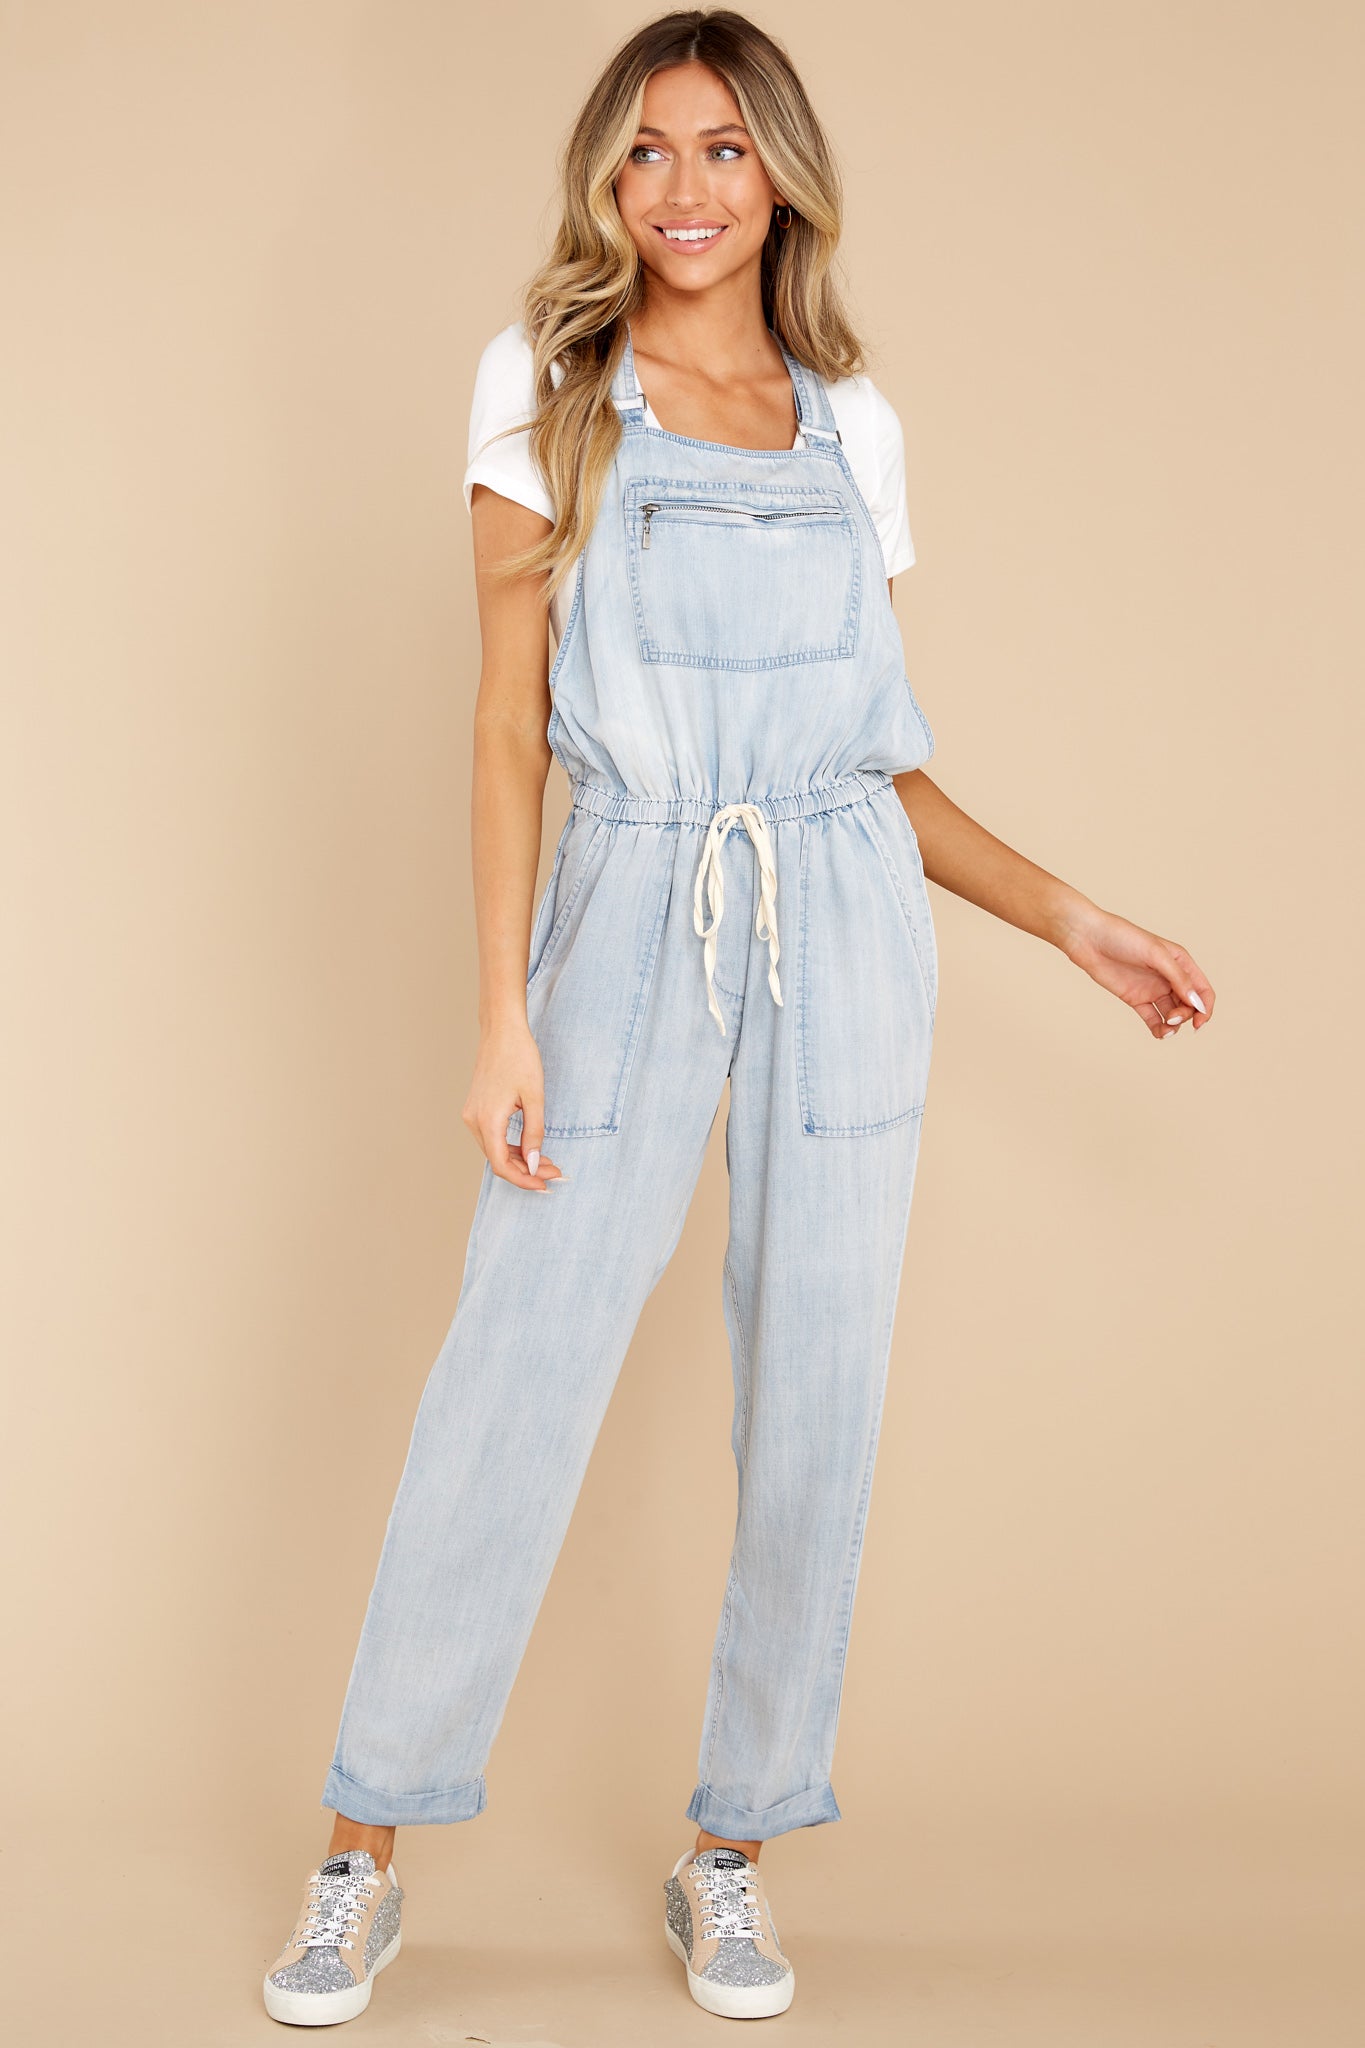 More Than Enough Light Chambray Overalls - Red Dress